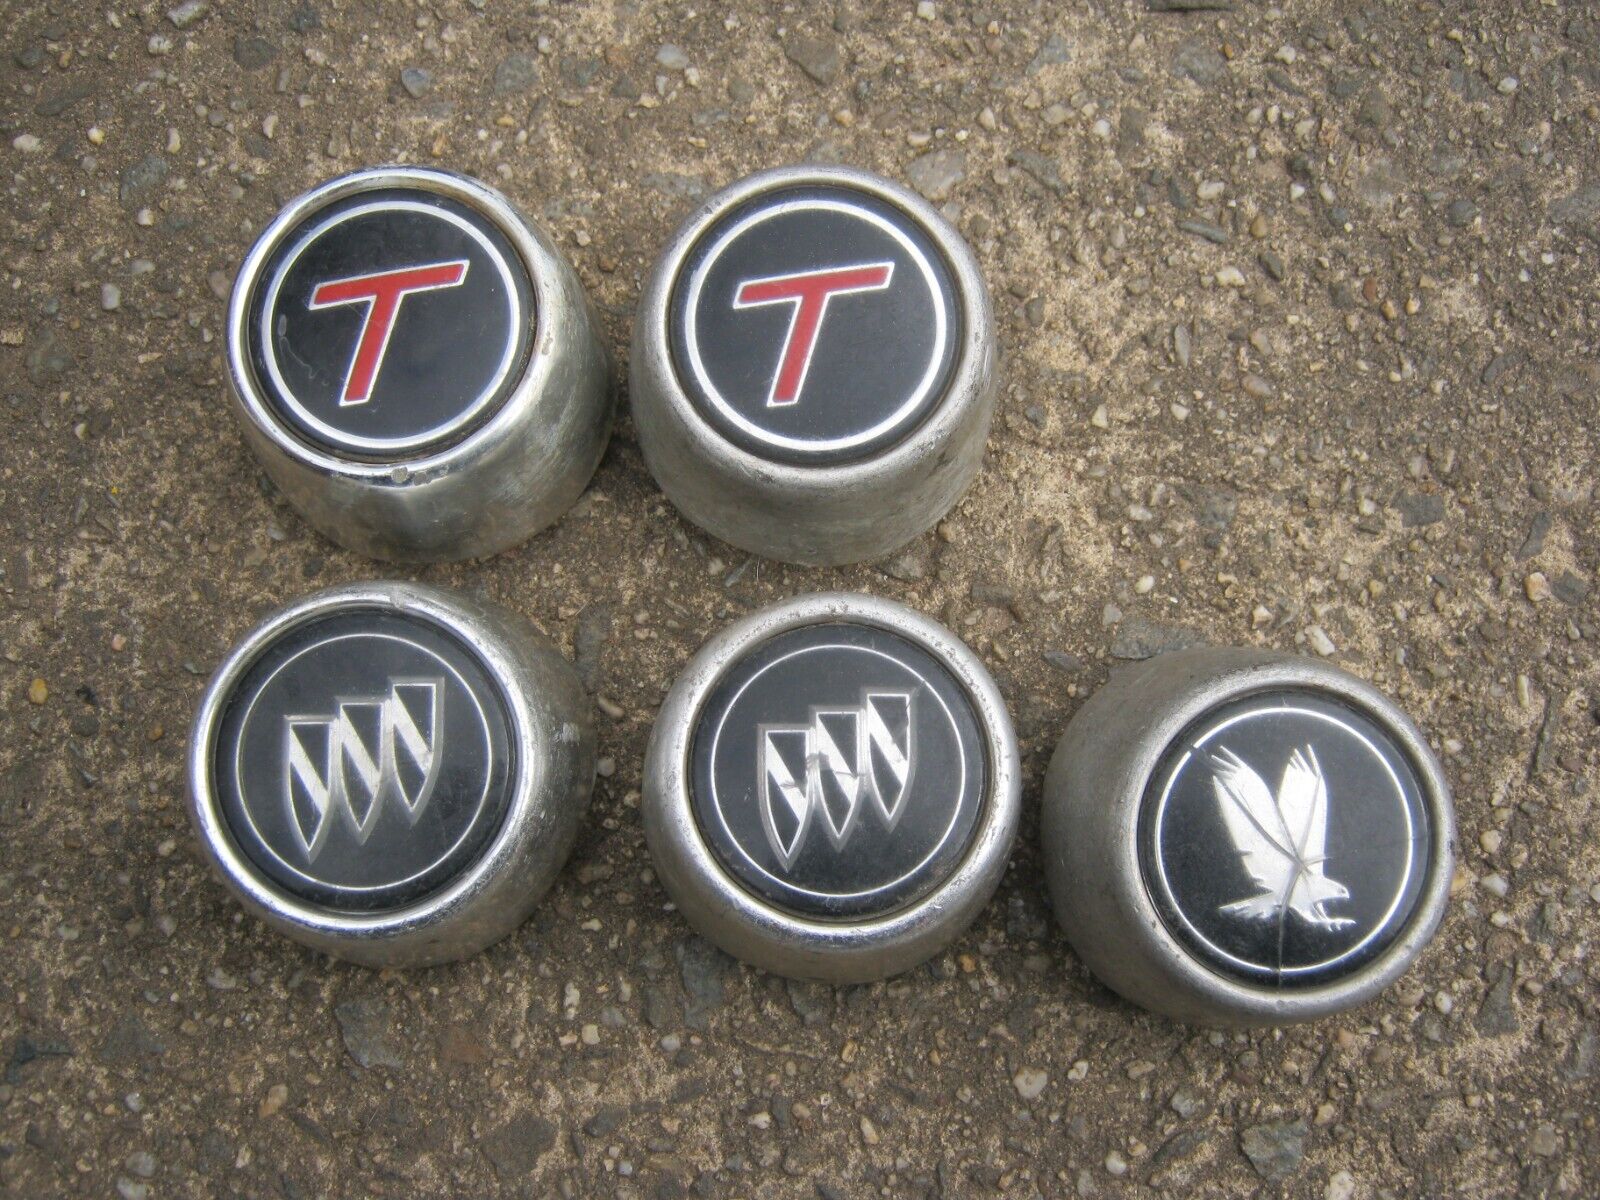 Lot of 5 assorted 1984 Buick Skyhawk T type center caps hubcaps for alloy wheel